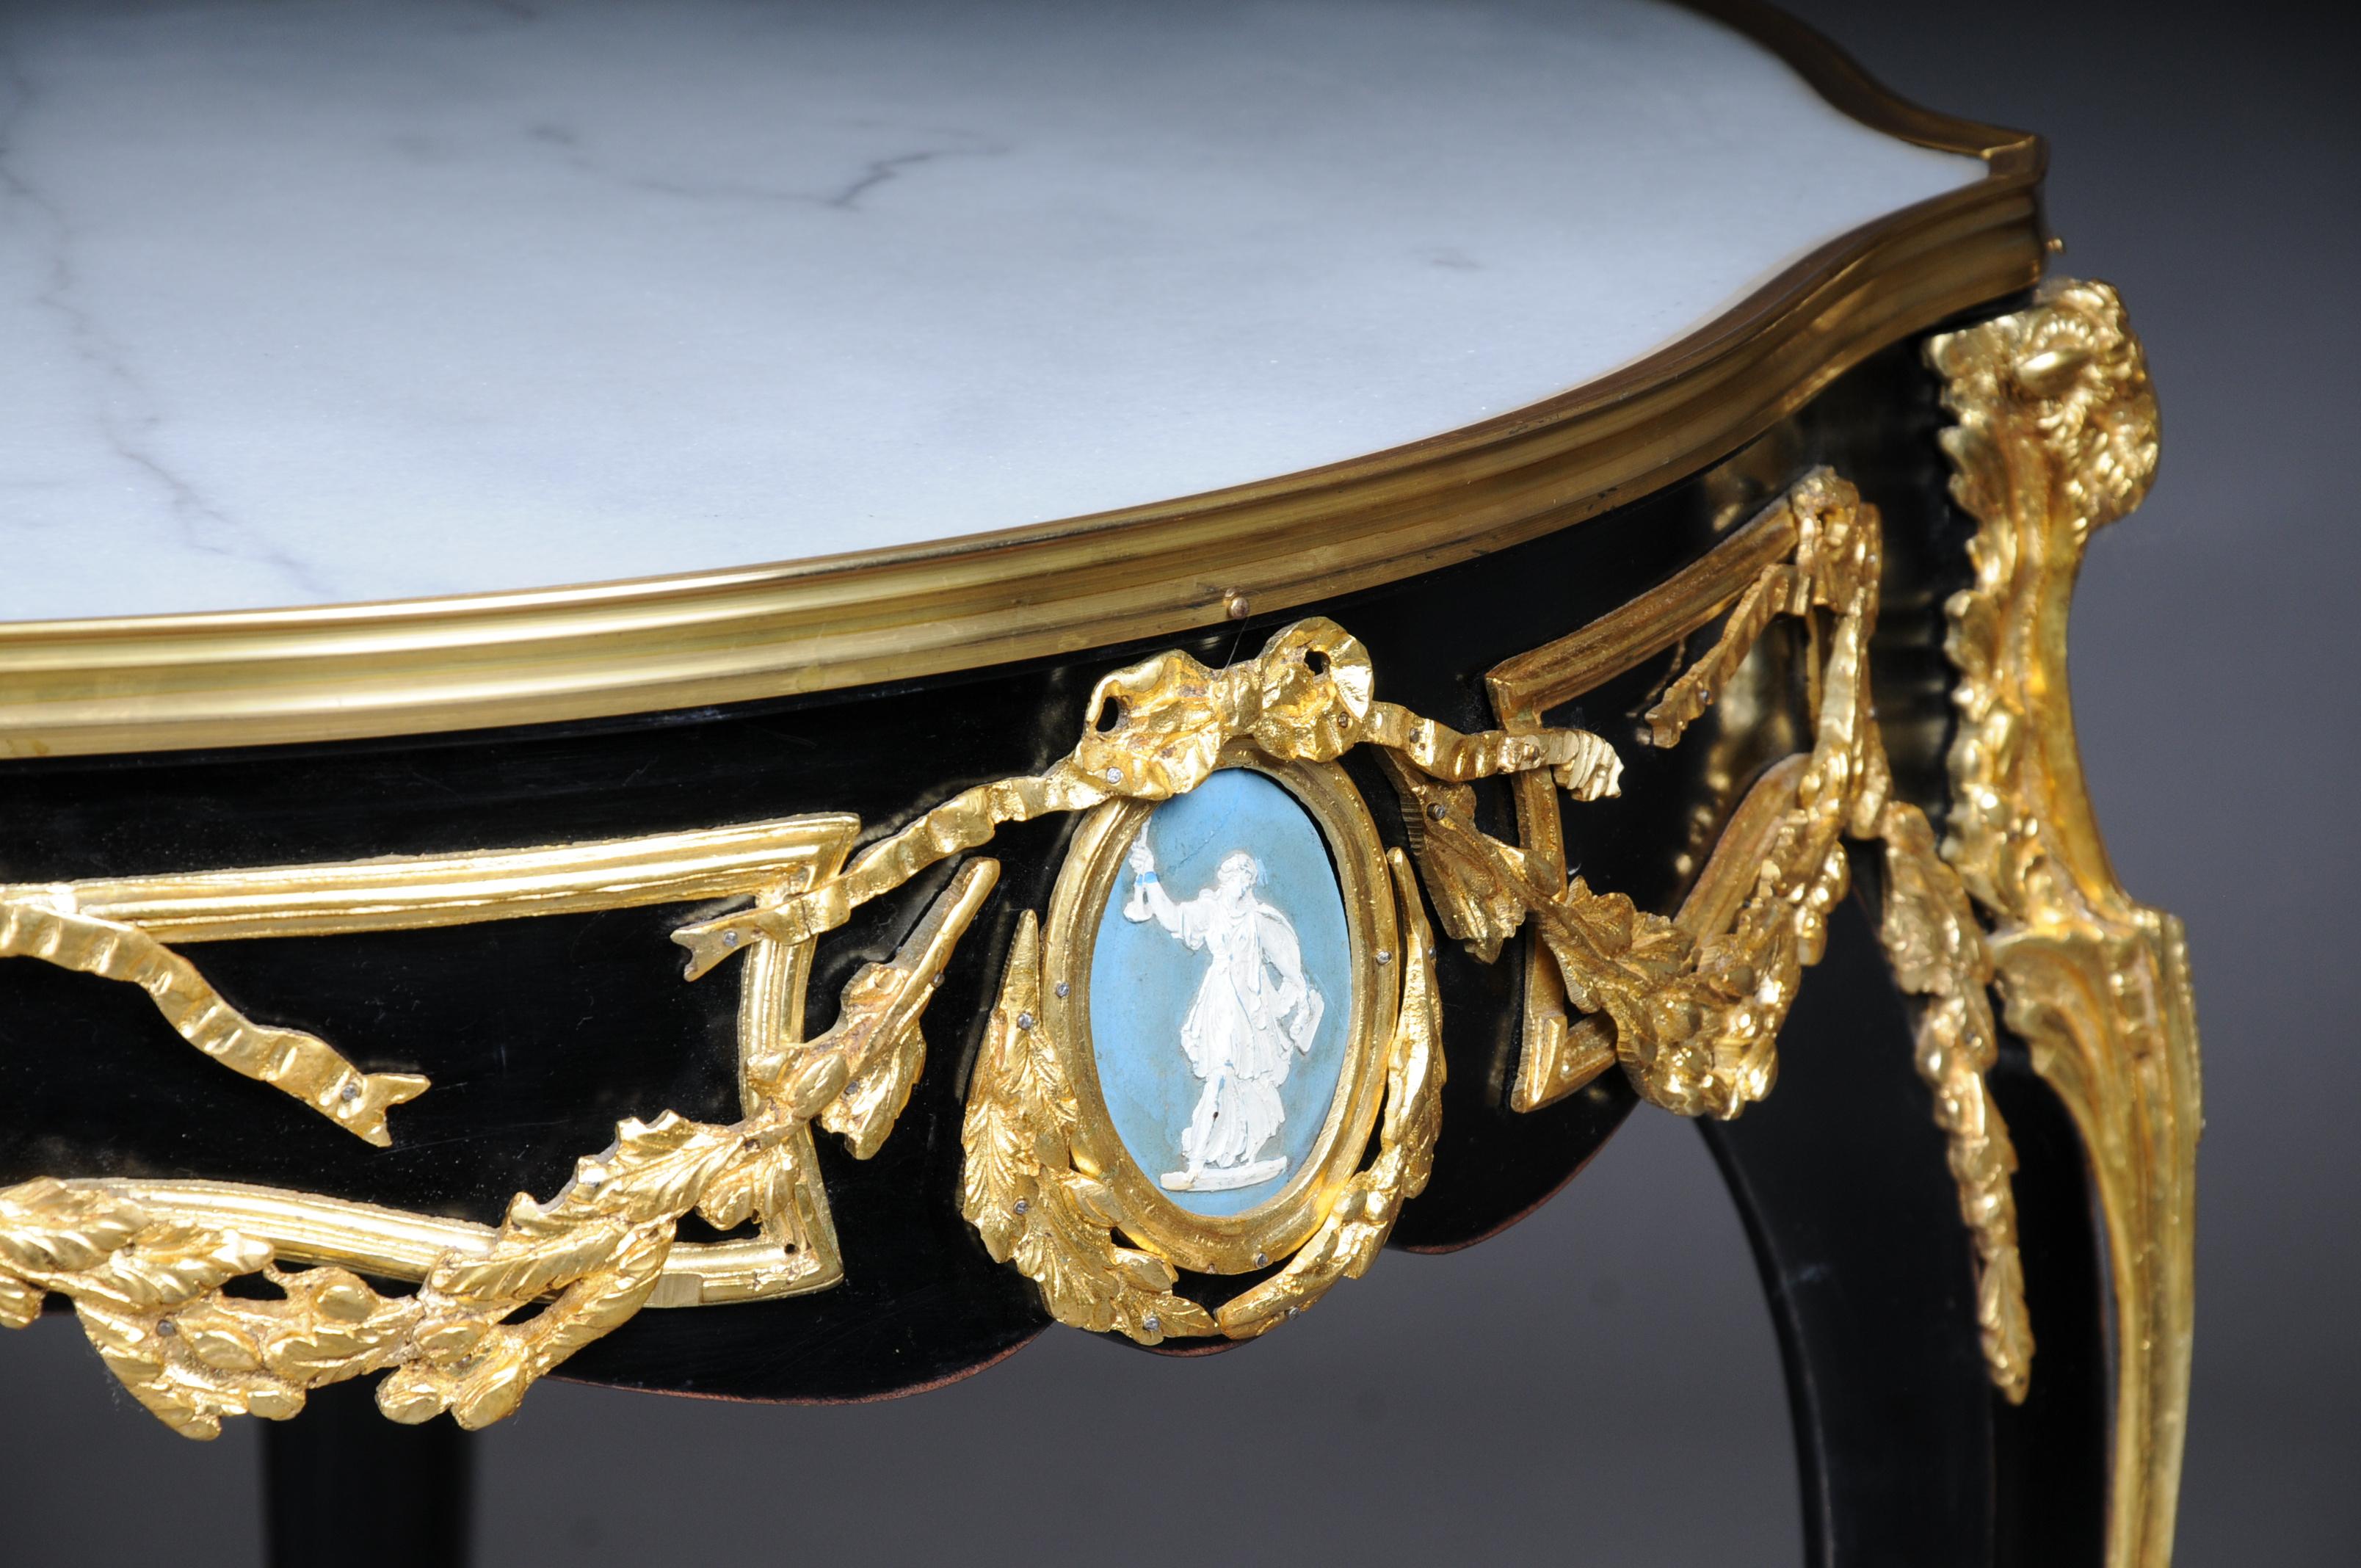 20th Century Classic Side Table, Gilt Bronze, Black, Louis XV For Sale 6